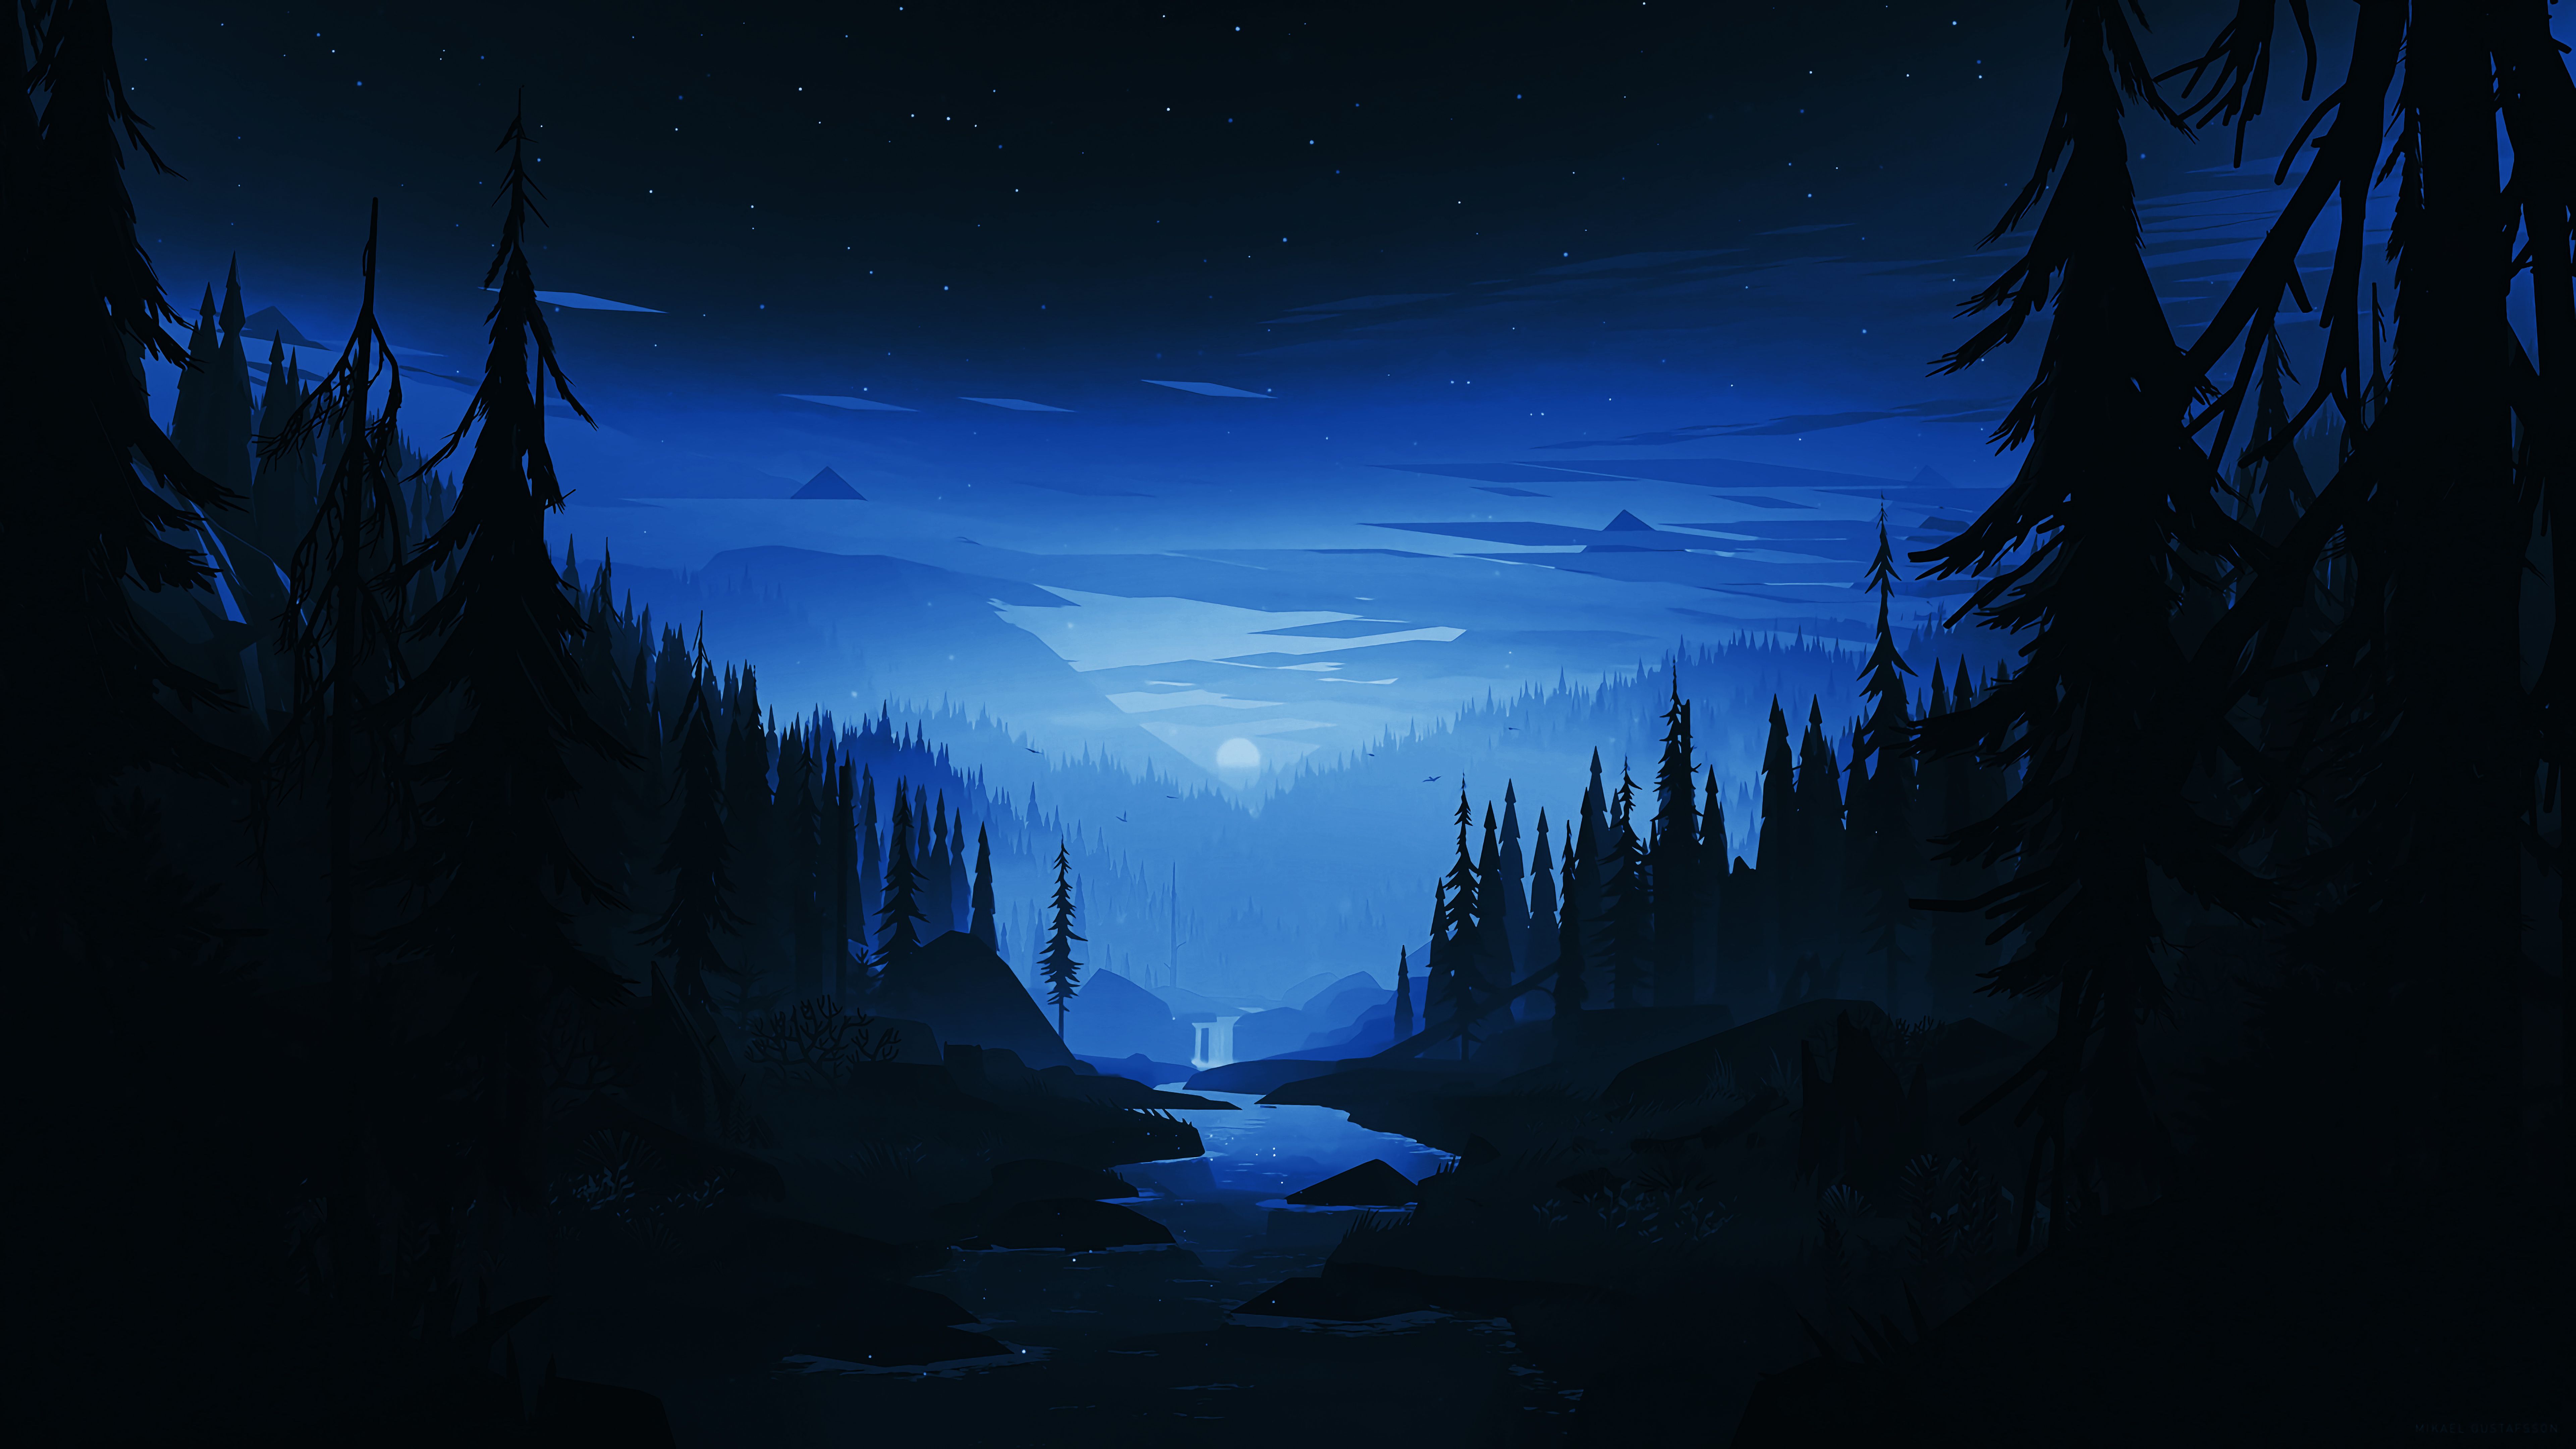 Small Memory Evening 8k, HD Artist, 4k Wallpaper, Image, Background, Photo and Picture